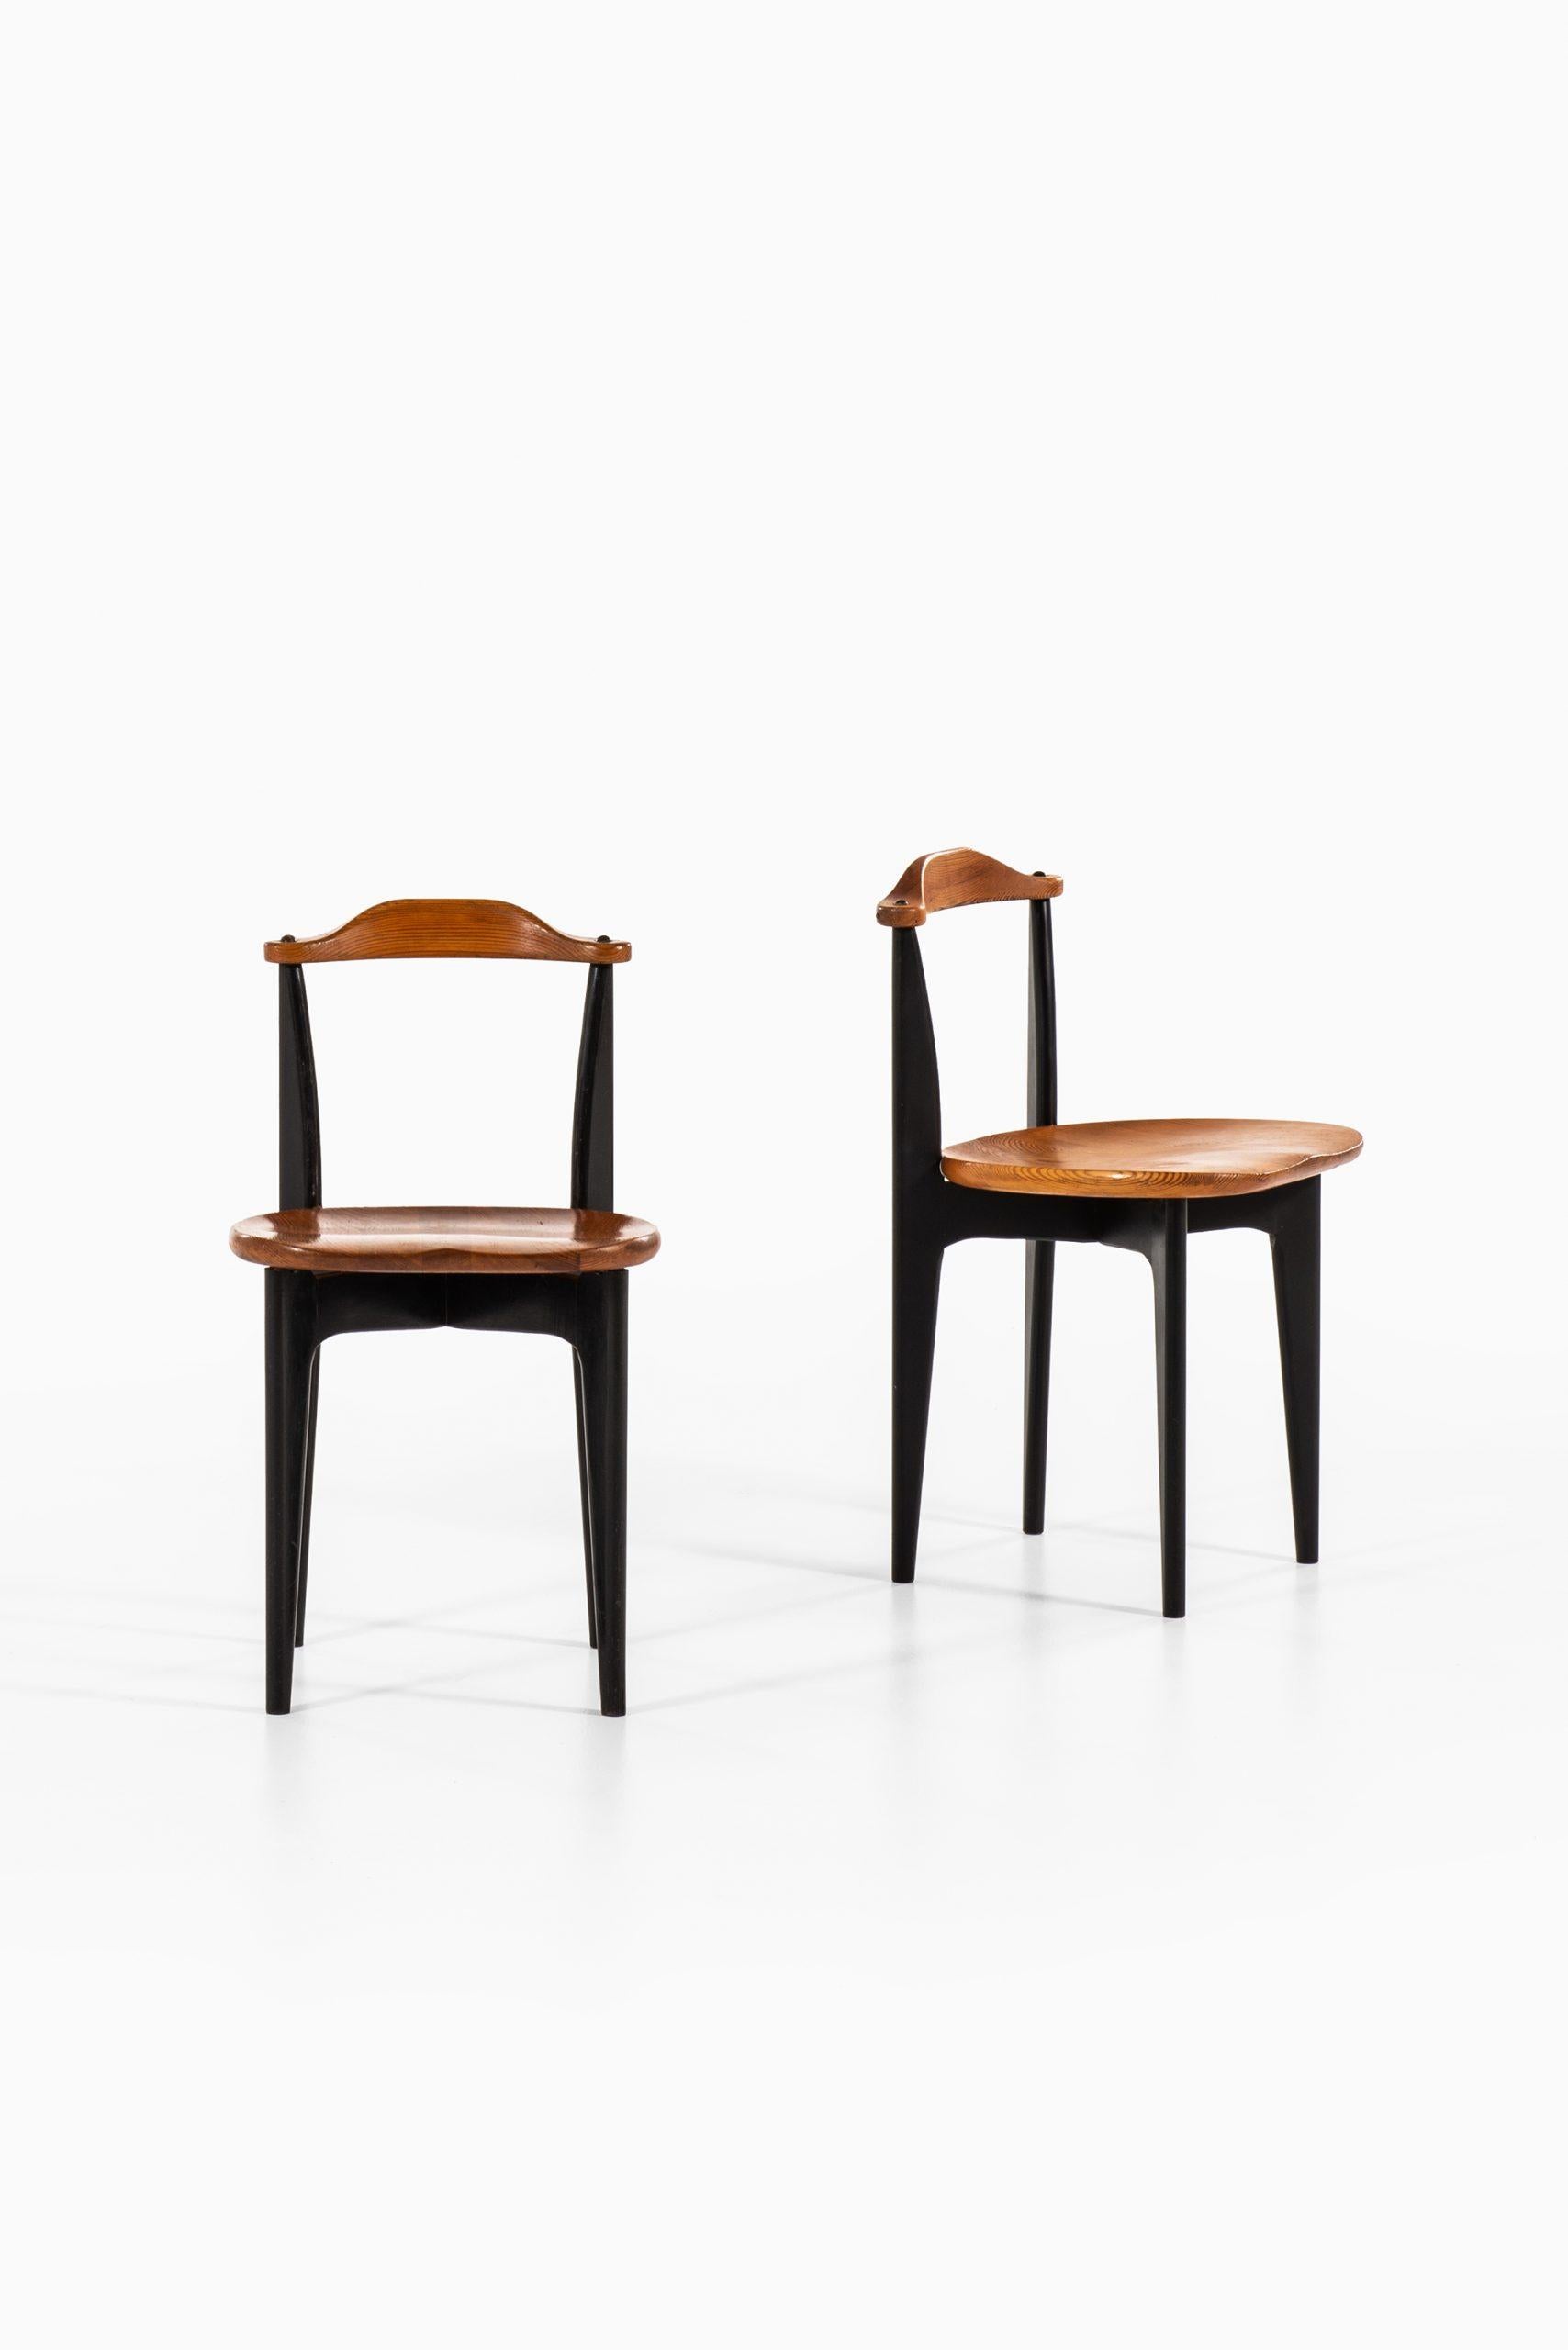 Scandinavian Modern Yngve Ekström Dining Chairs Model Thema Produced by Swedese in Sweden For Sale